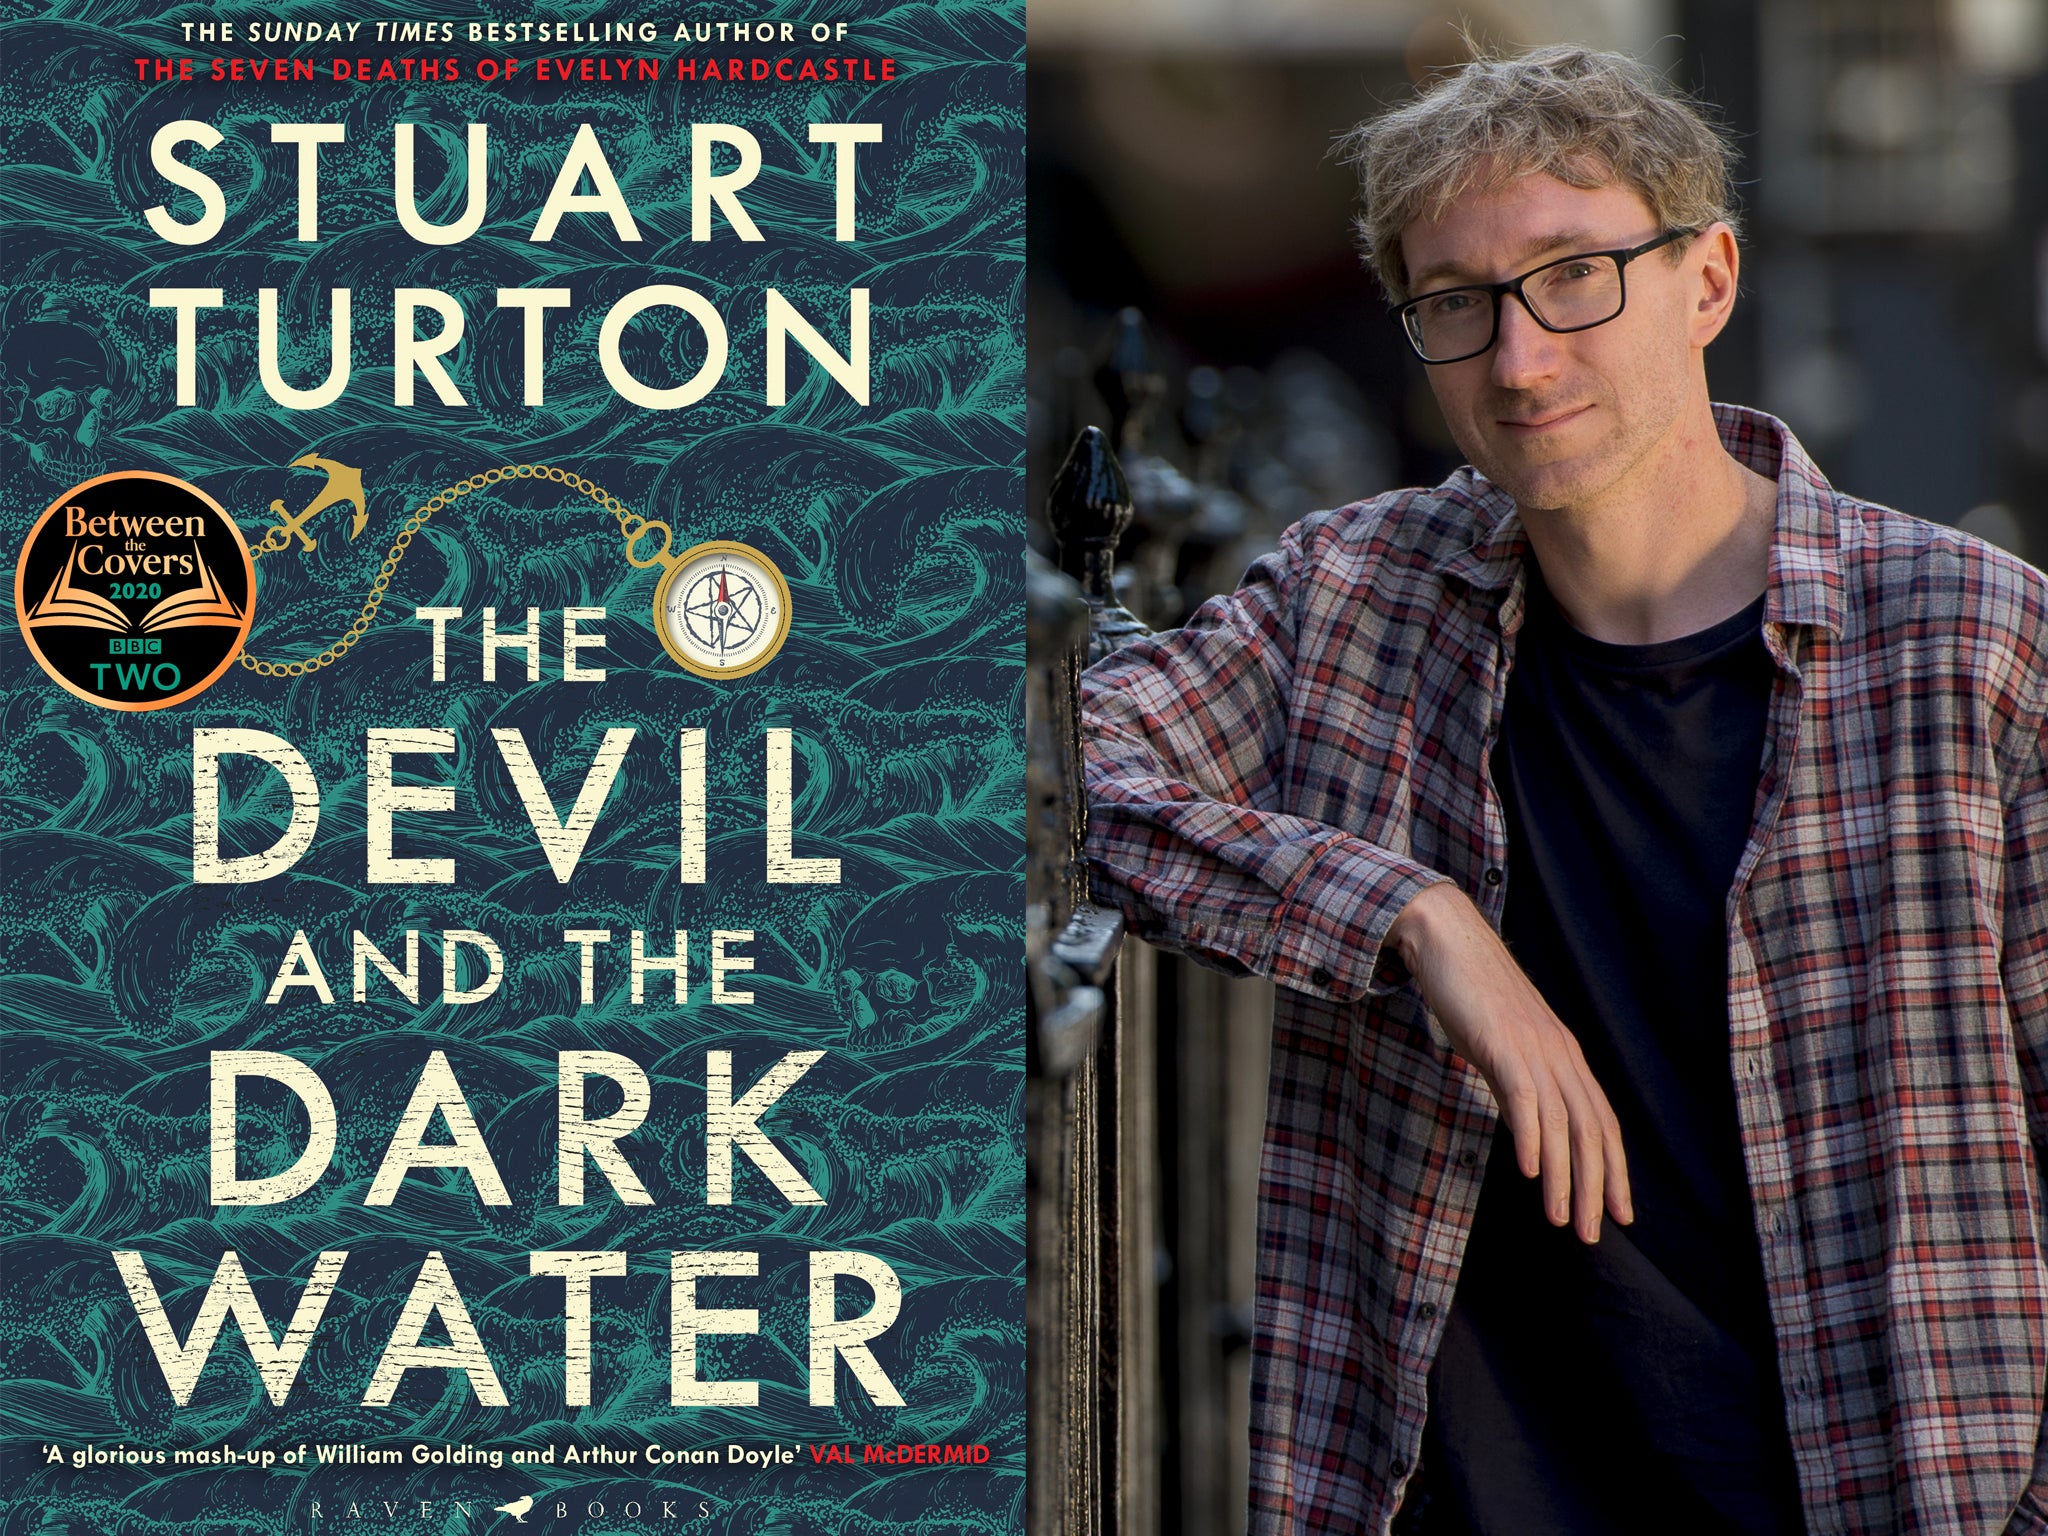 Stuart Turton conjures up a vivid picture of the depravity and stench of a 17th-century voyage in his intoxicating thriller ‘The Devil and the Dark Water’